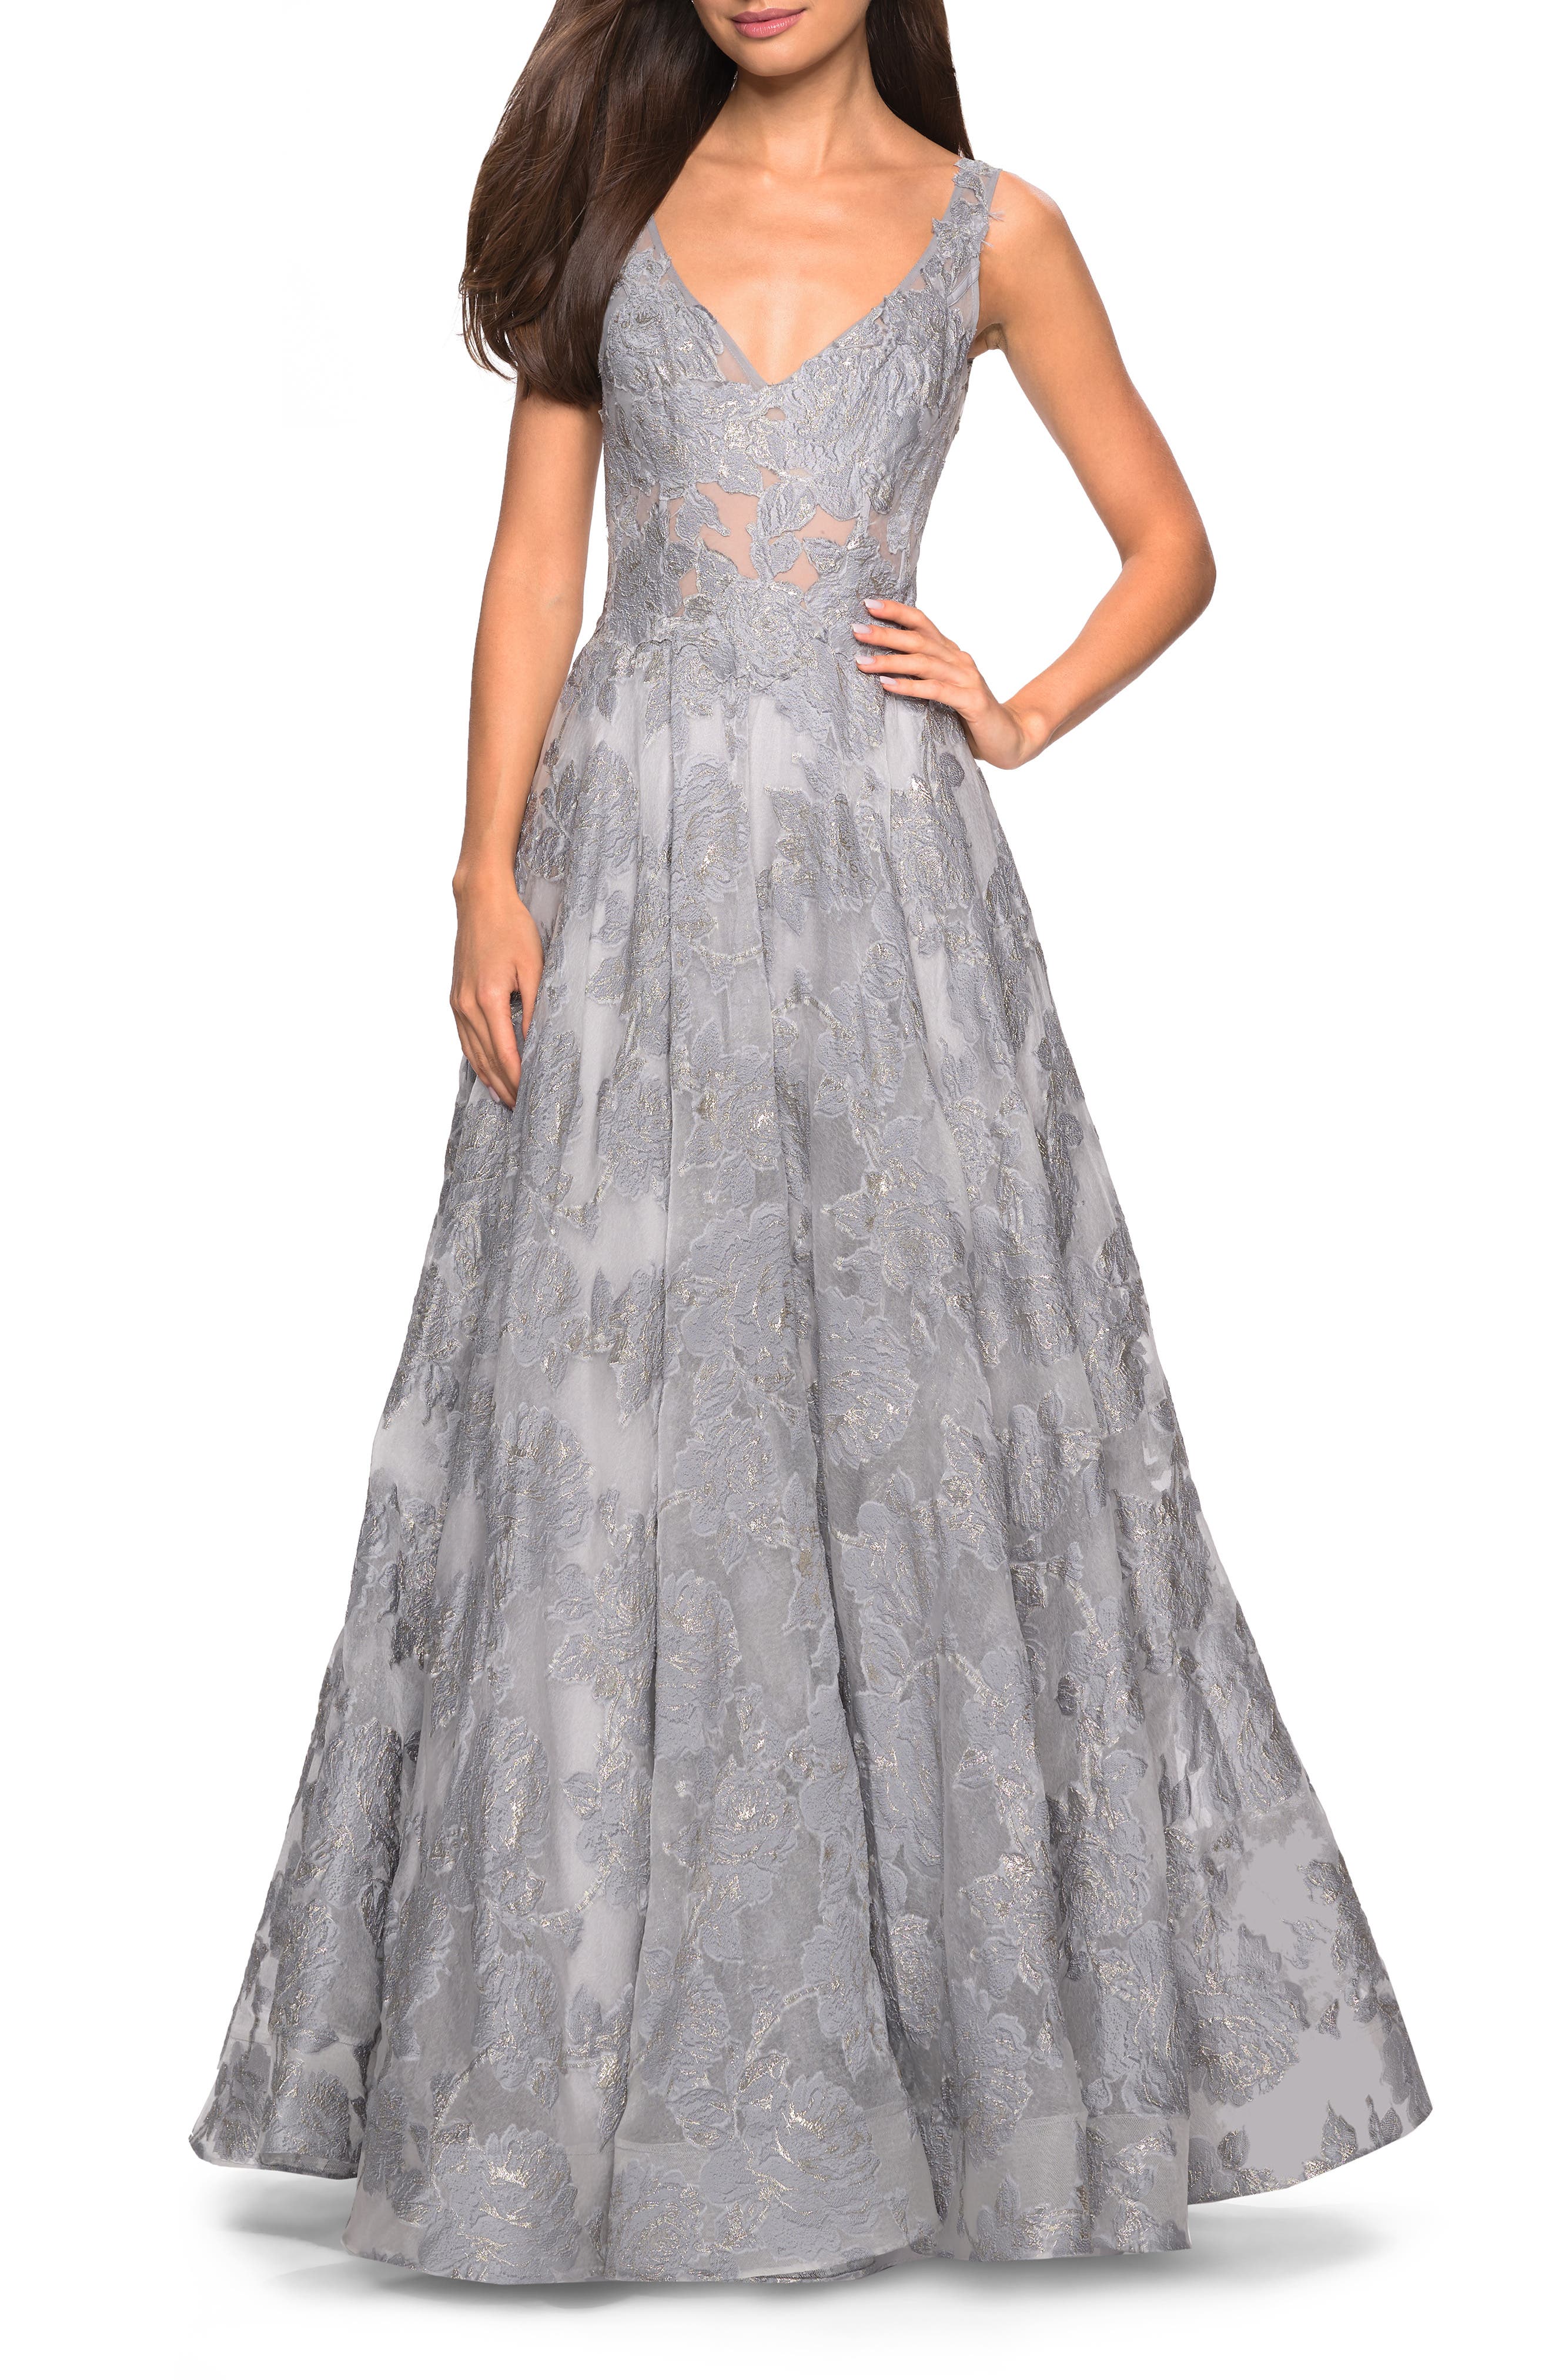 Grey Formal Dresses ☀ Evening Gowns ...